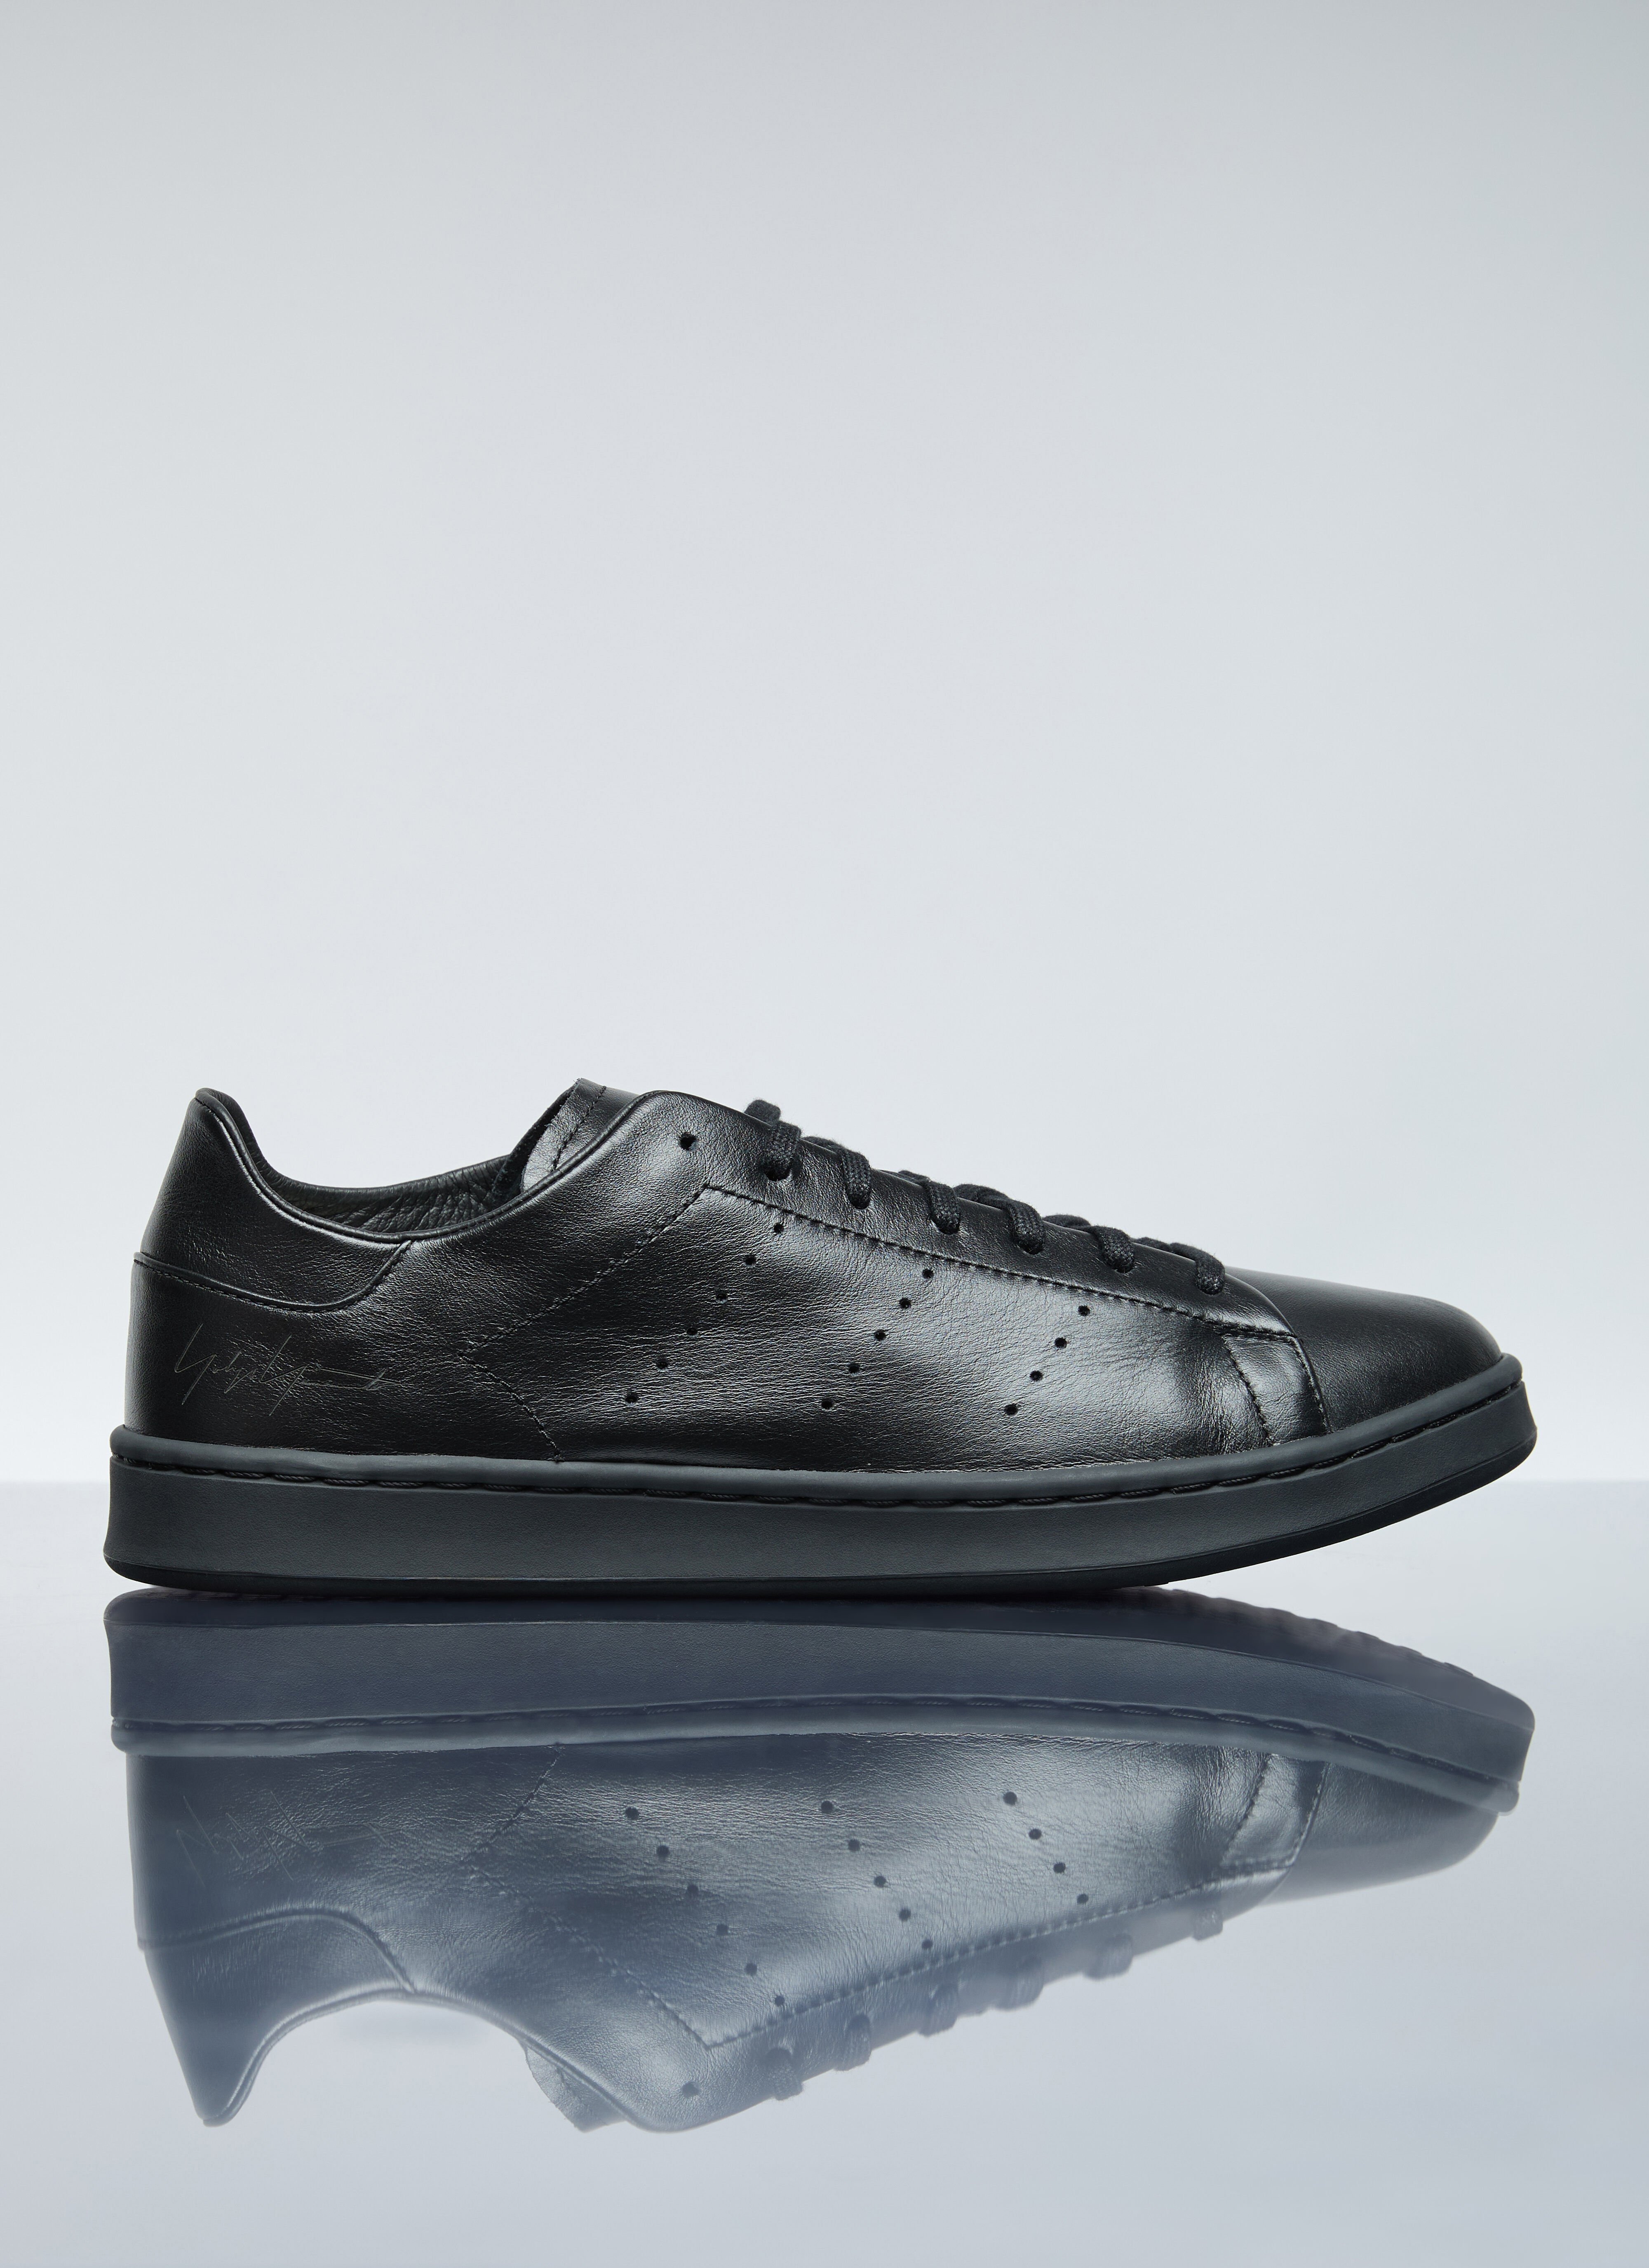 Y-3 Y-3 Stan Smith Leather Sneakers Black yyy0156005